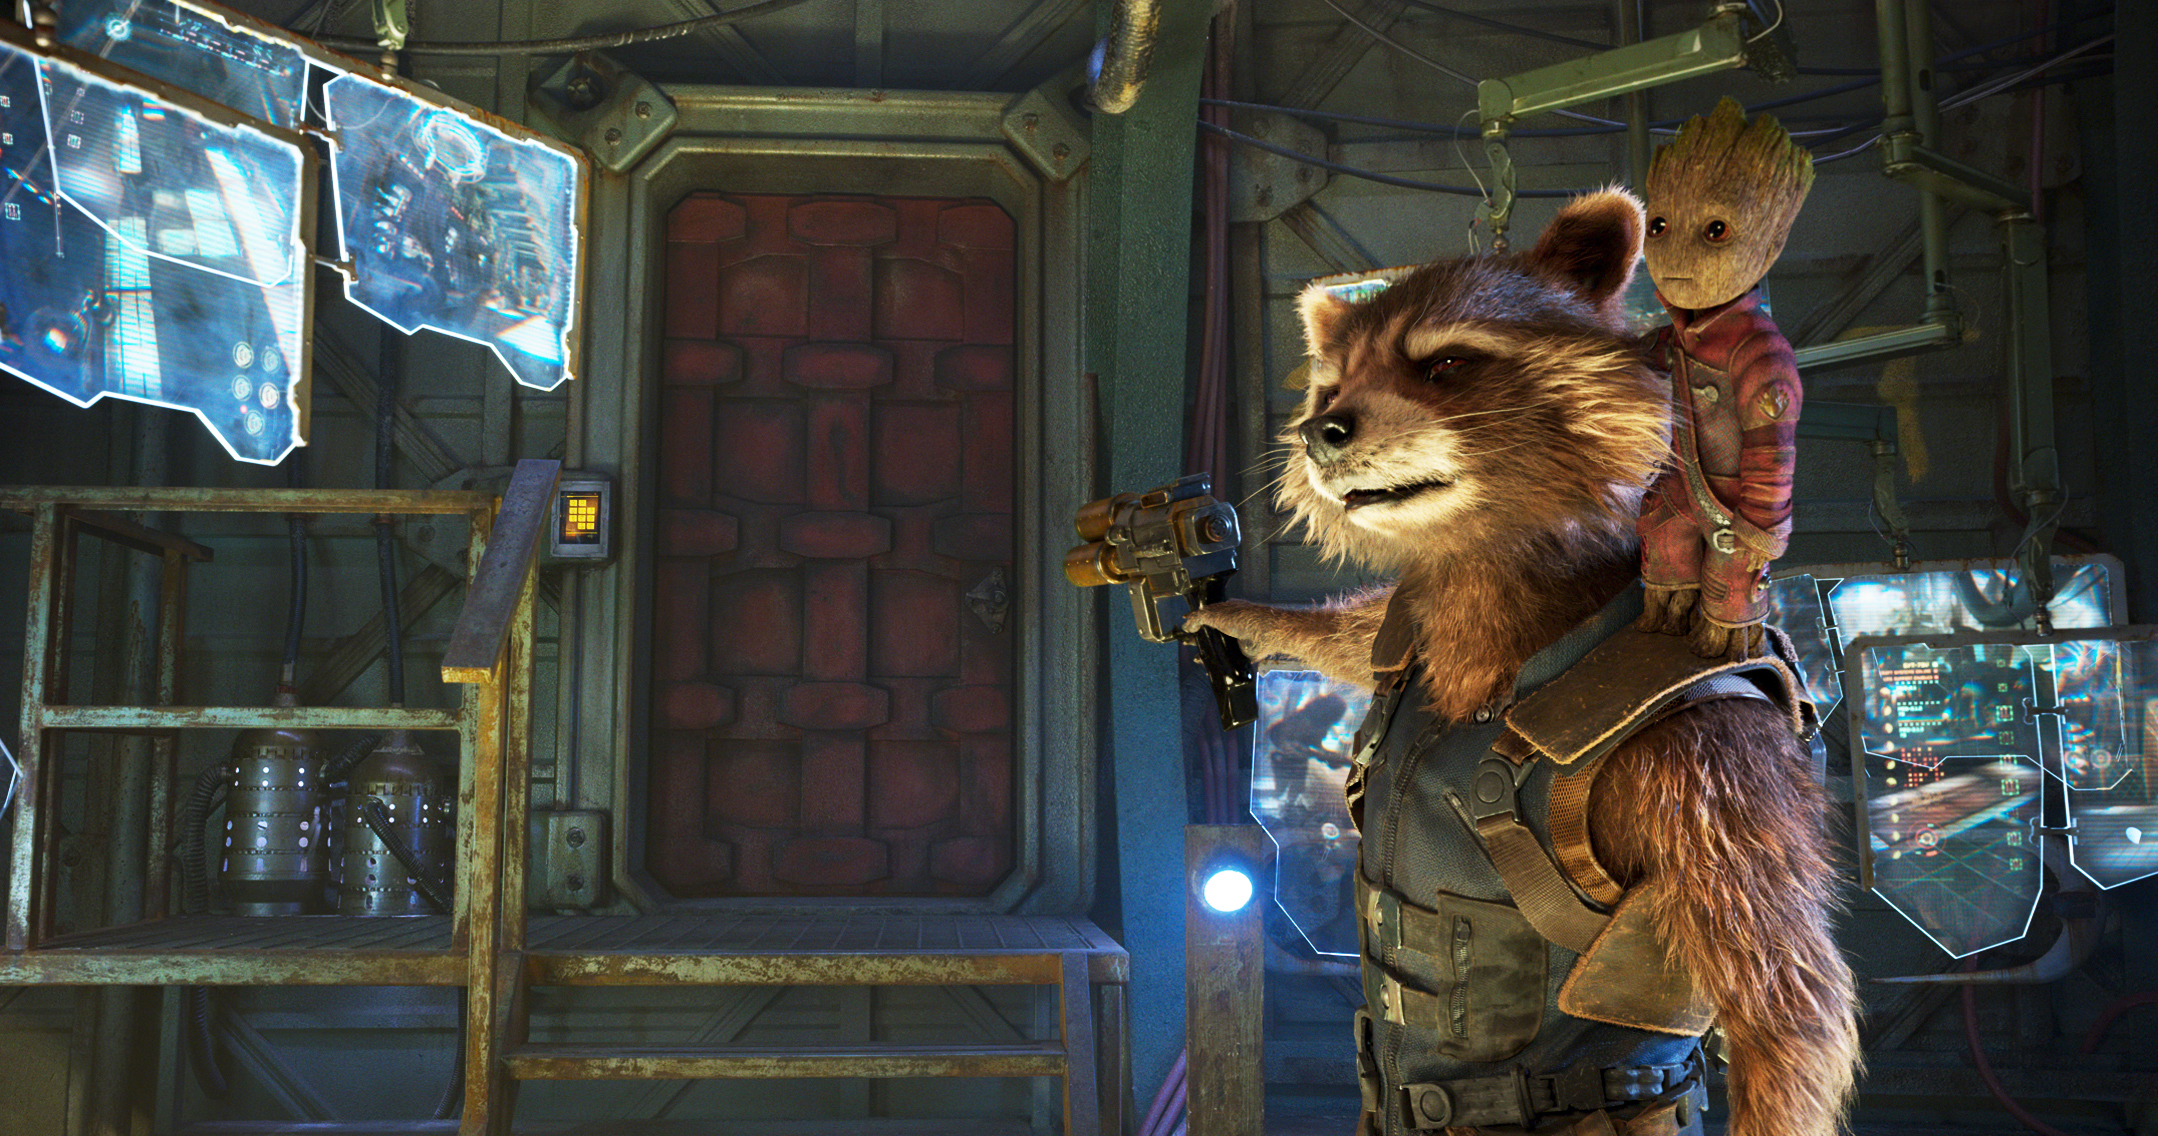 Rocket, voiced by Bradley Cooper, and Groot, voiced by Vin Diesel in <i>Guardians Of The Galaxy Vol. 2</i>. (Marvel)